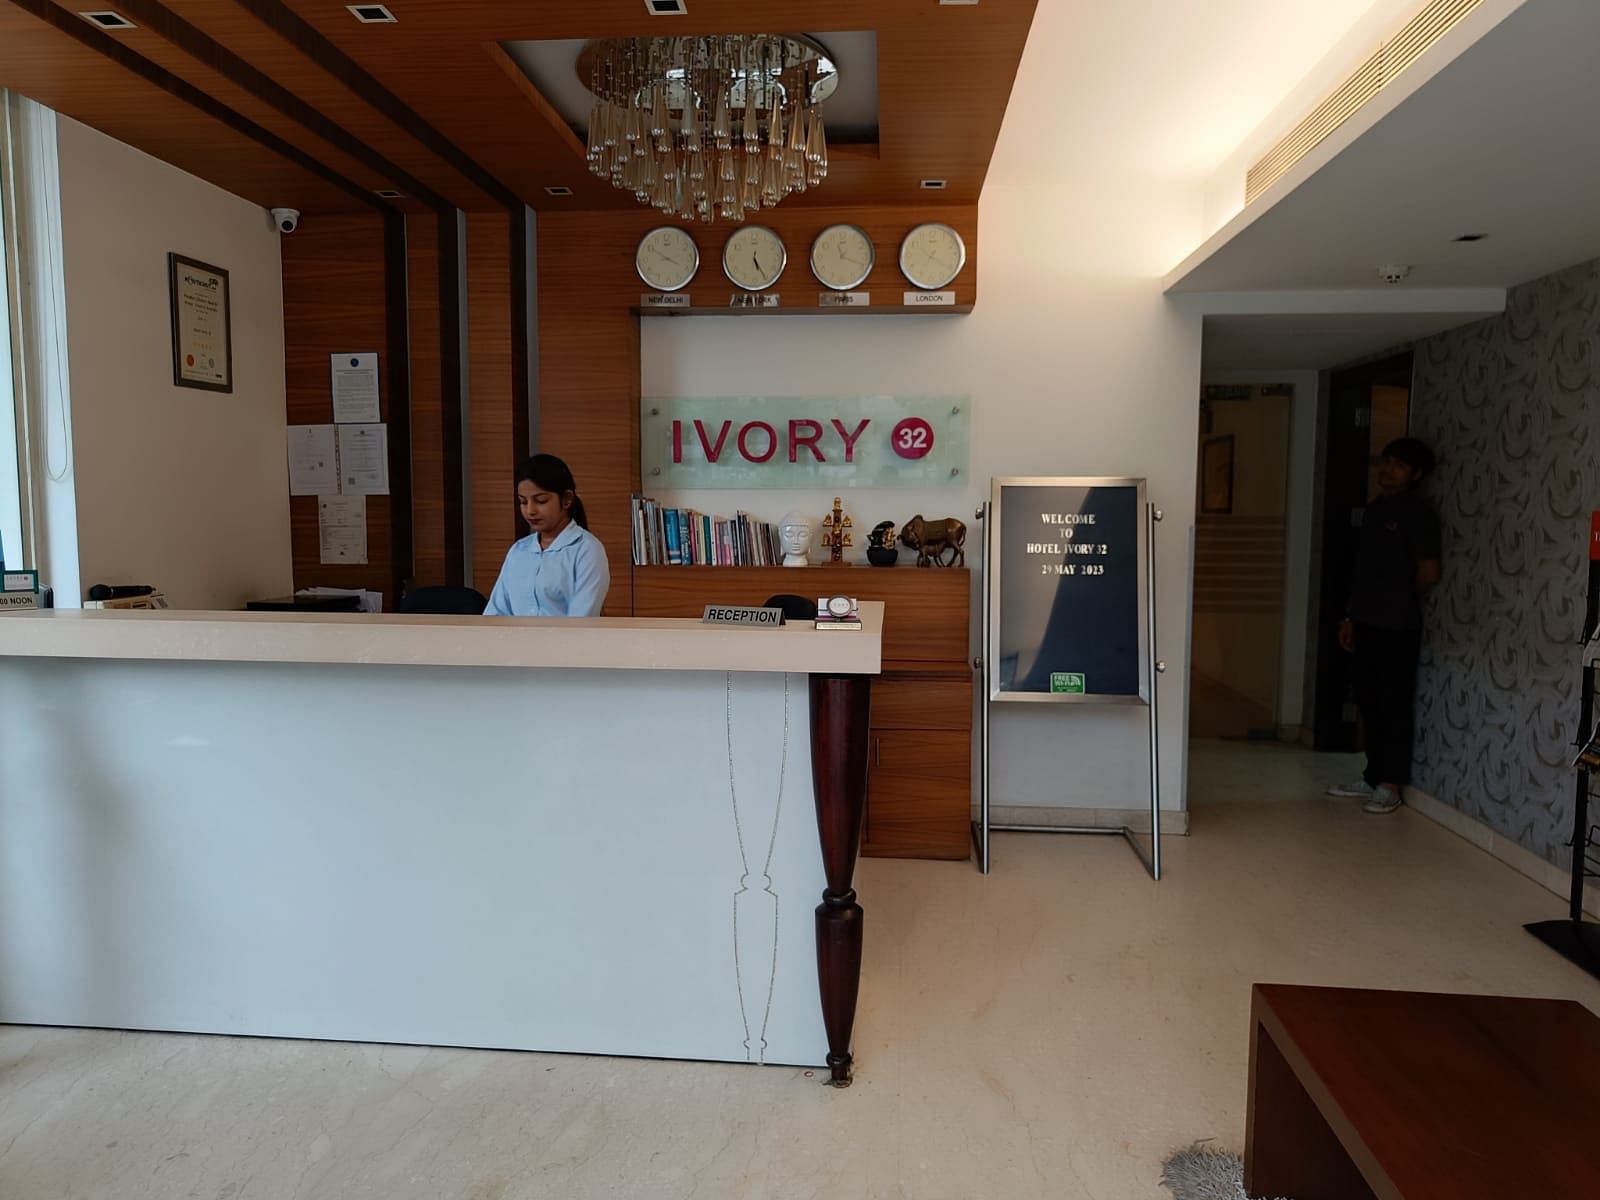 Ivory 32 in Greater Kailash 1, Delhi